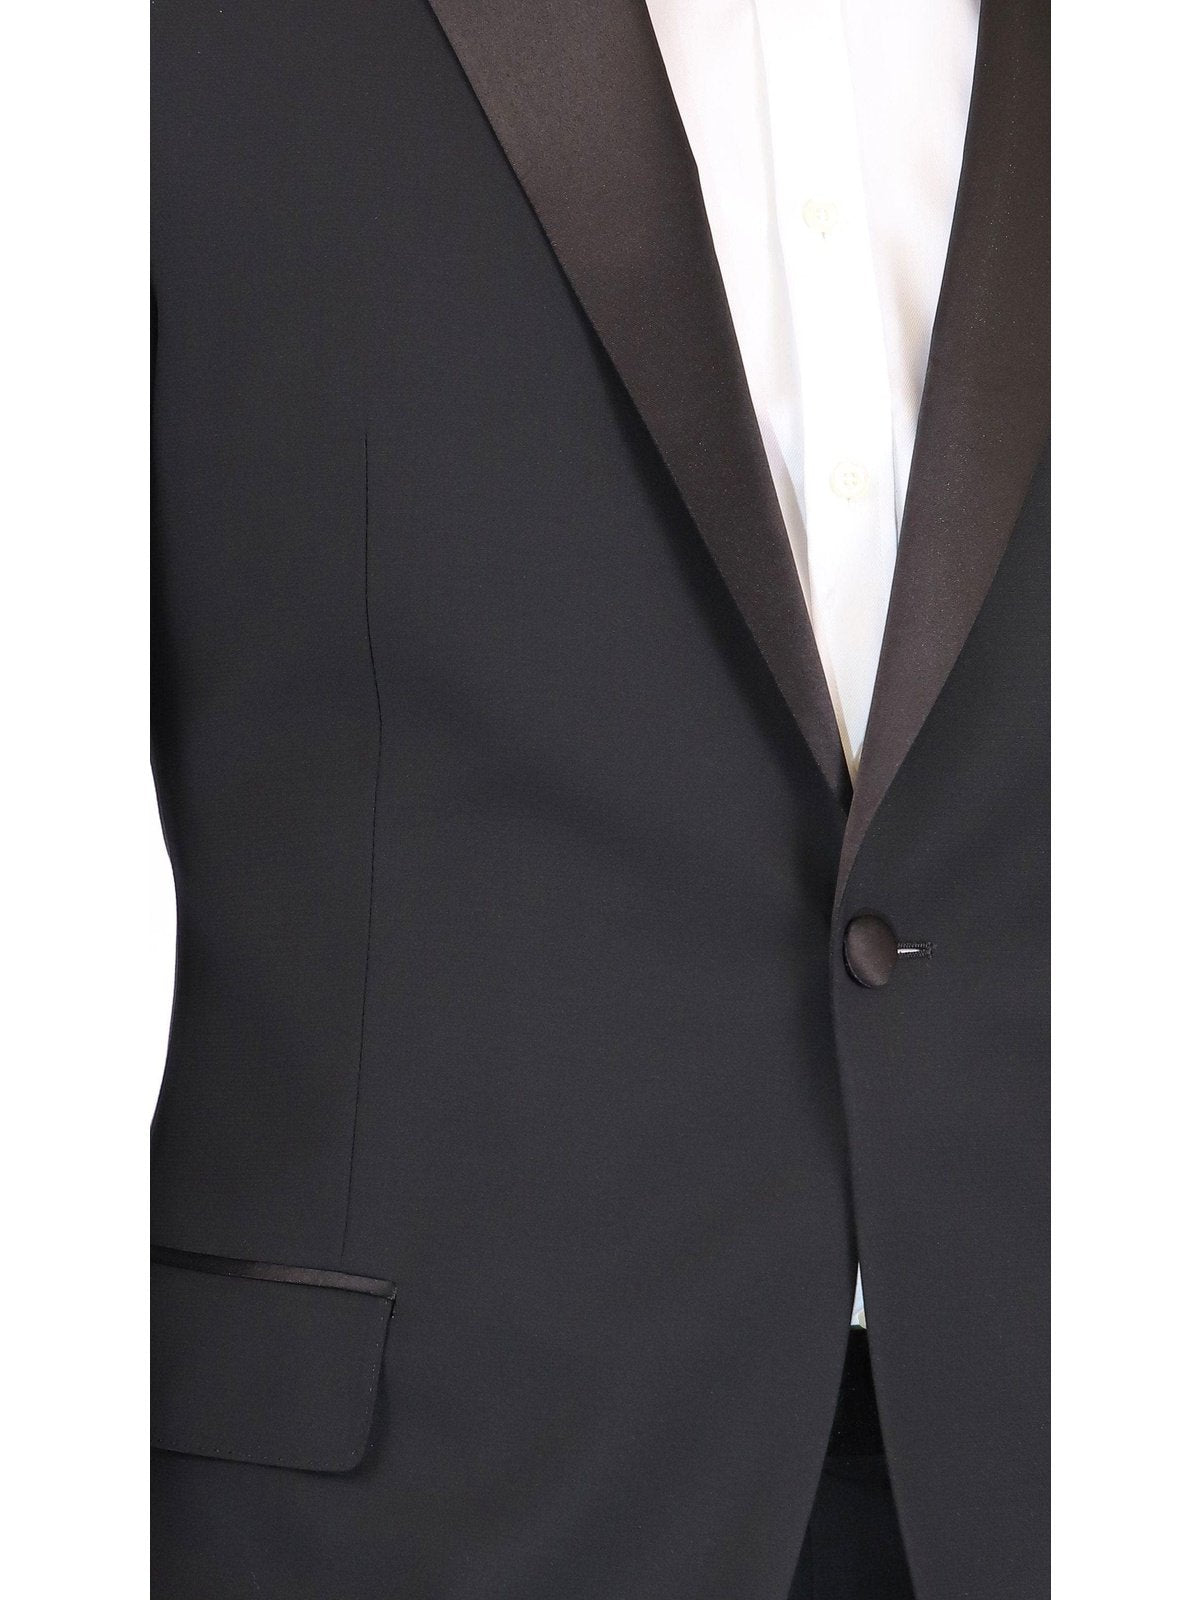 Blujacket TUXEDOS Blujacket Mens Solid Black 100% Wool Regular Fit Tuxedo Suit With Satin Lapel